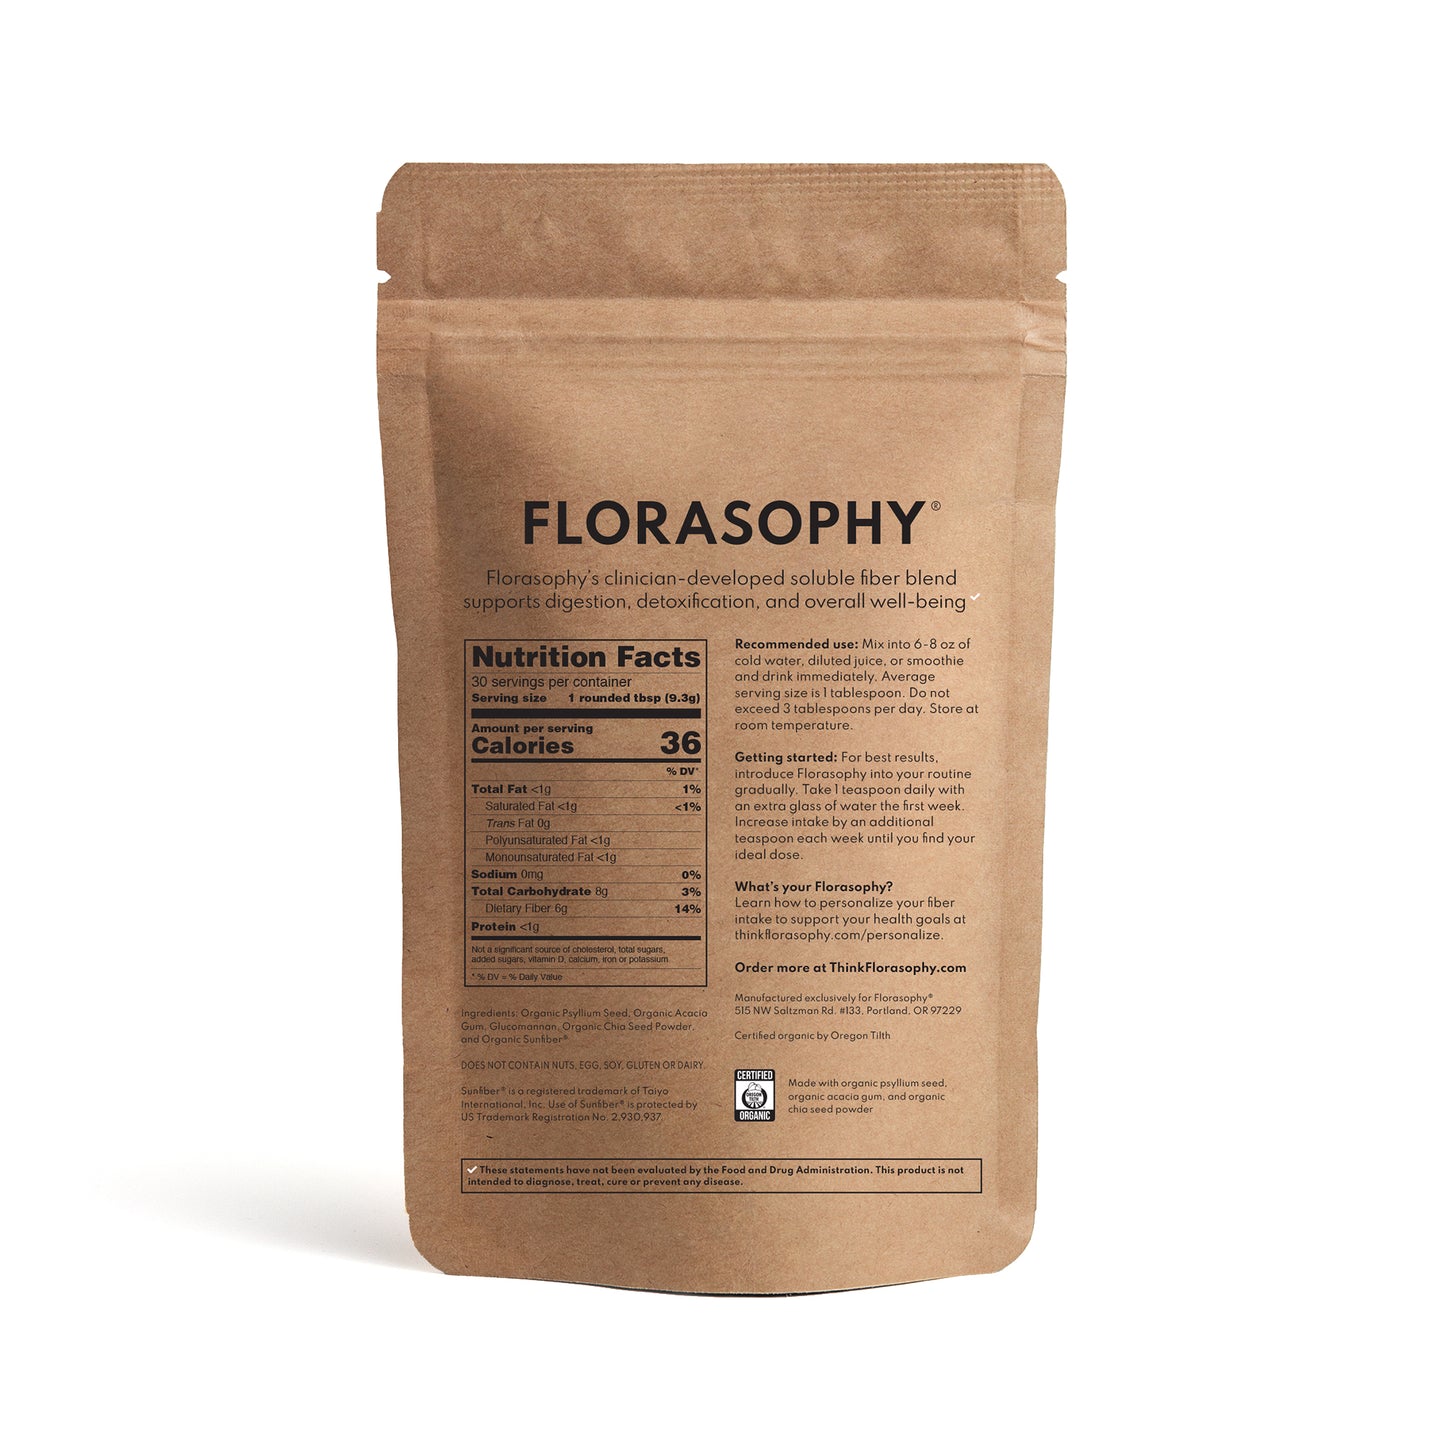 Florasophy Firm Up soluble fiber supplement facts